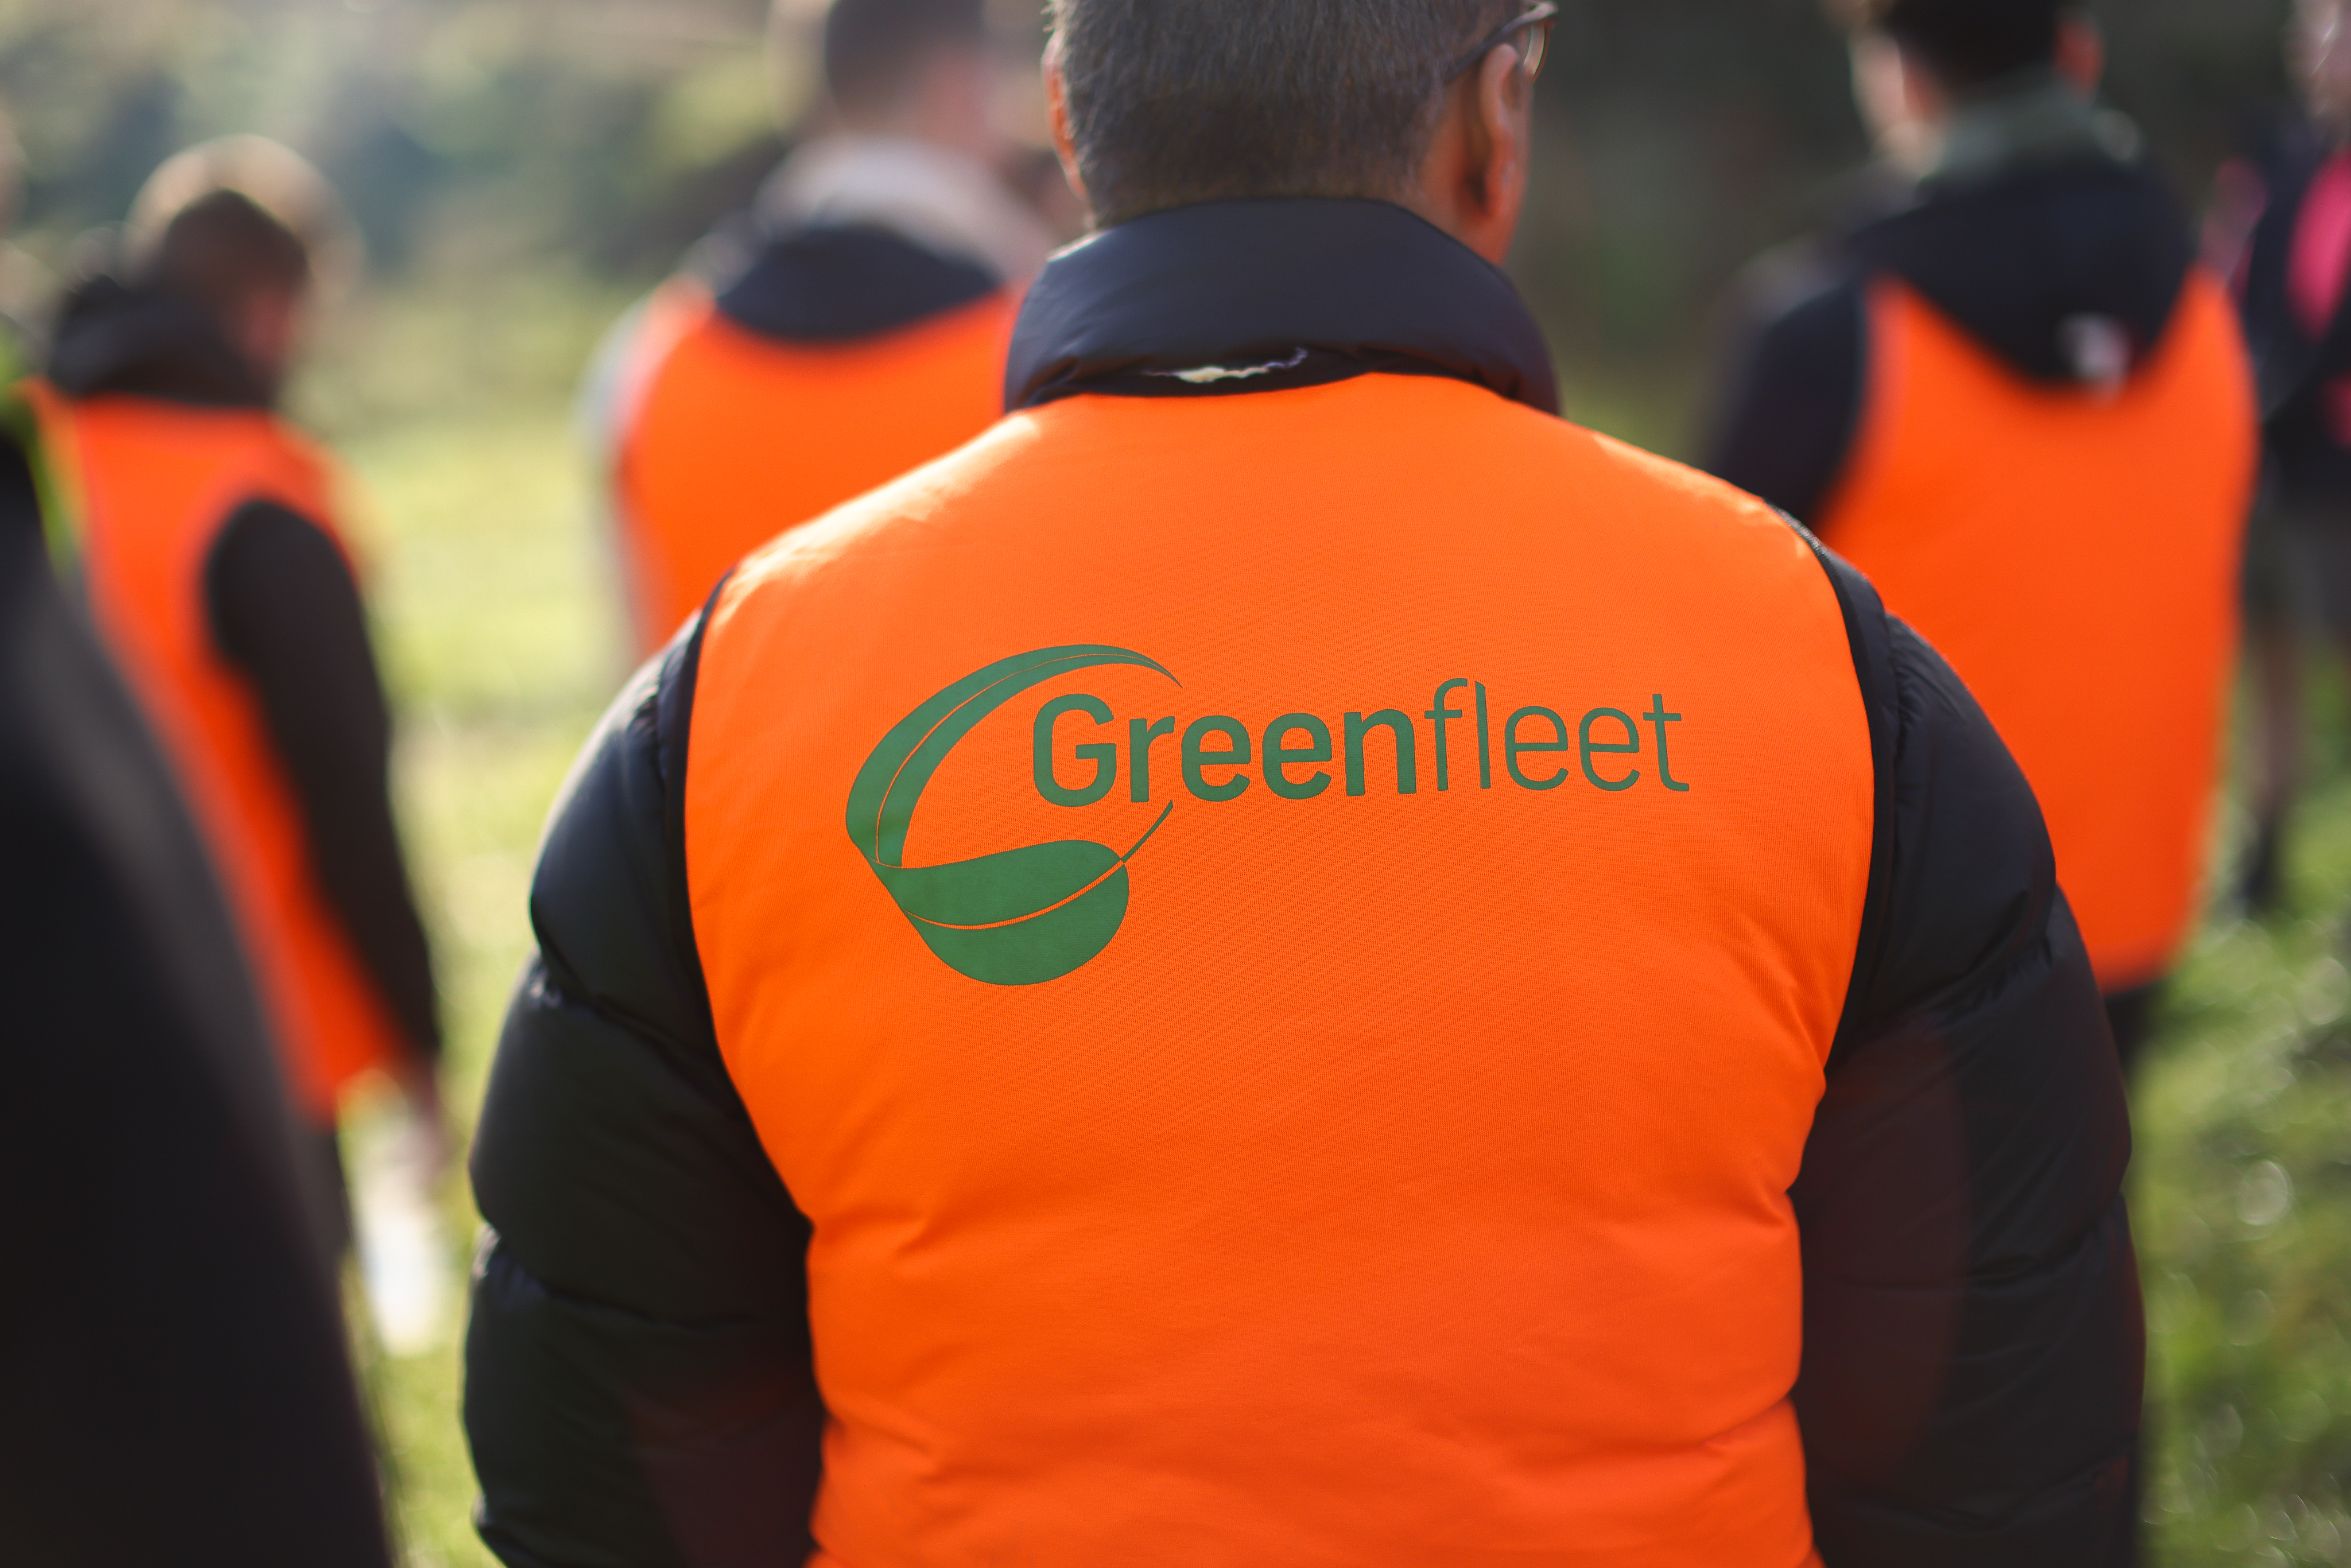 FleetCard™ is proud to be the first multi-branded fuel card in the country to introduce a carbon offset program for its Australian customers through Greenfleet.